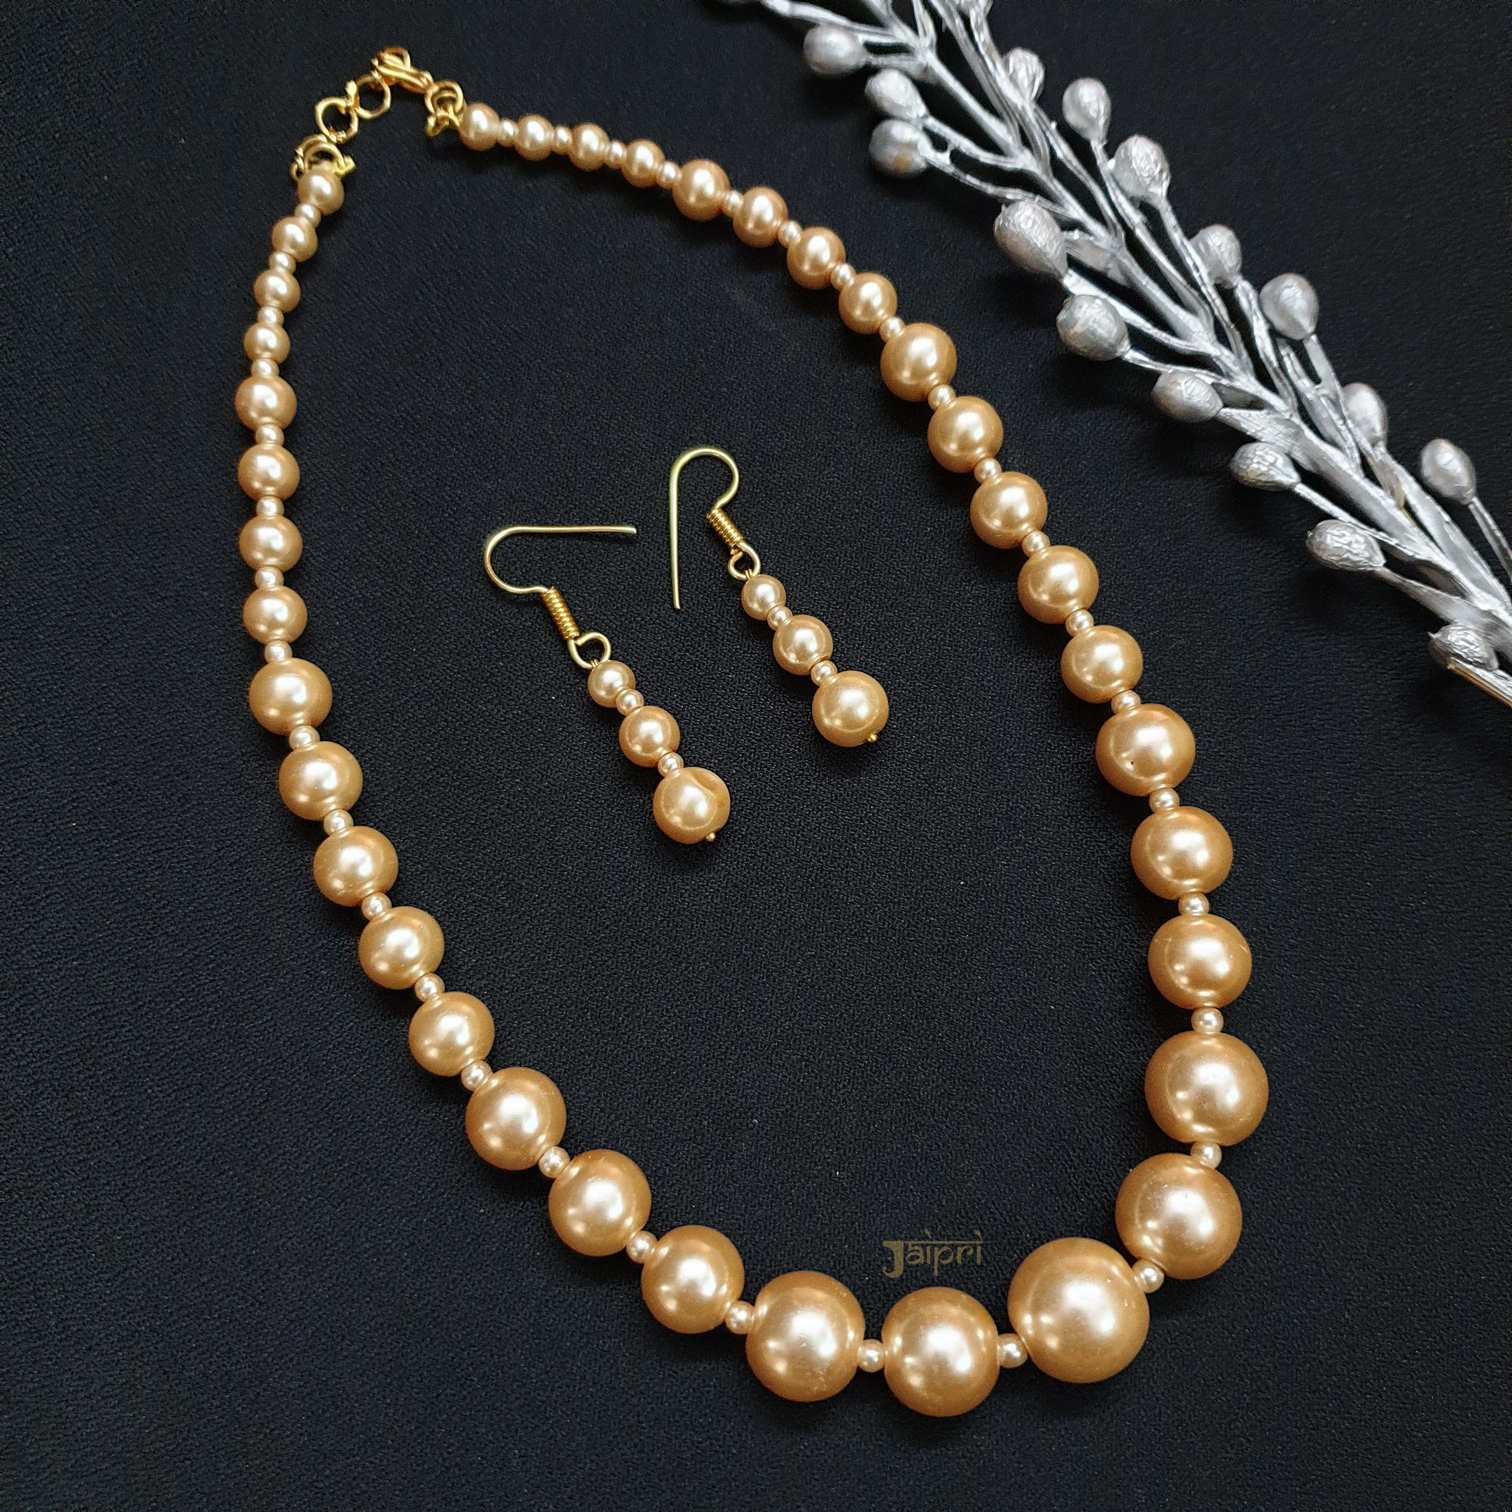 Off-White Pearl Beads Stone Necklace With Earrings